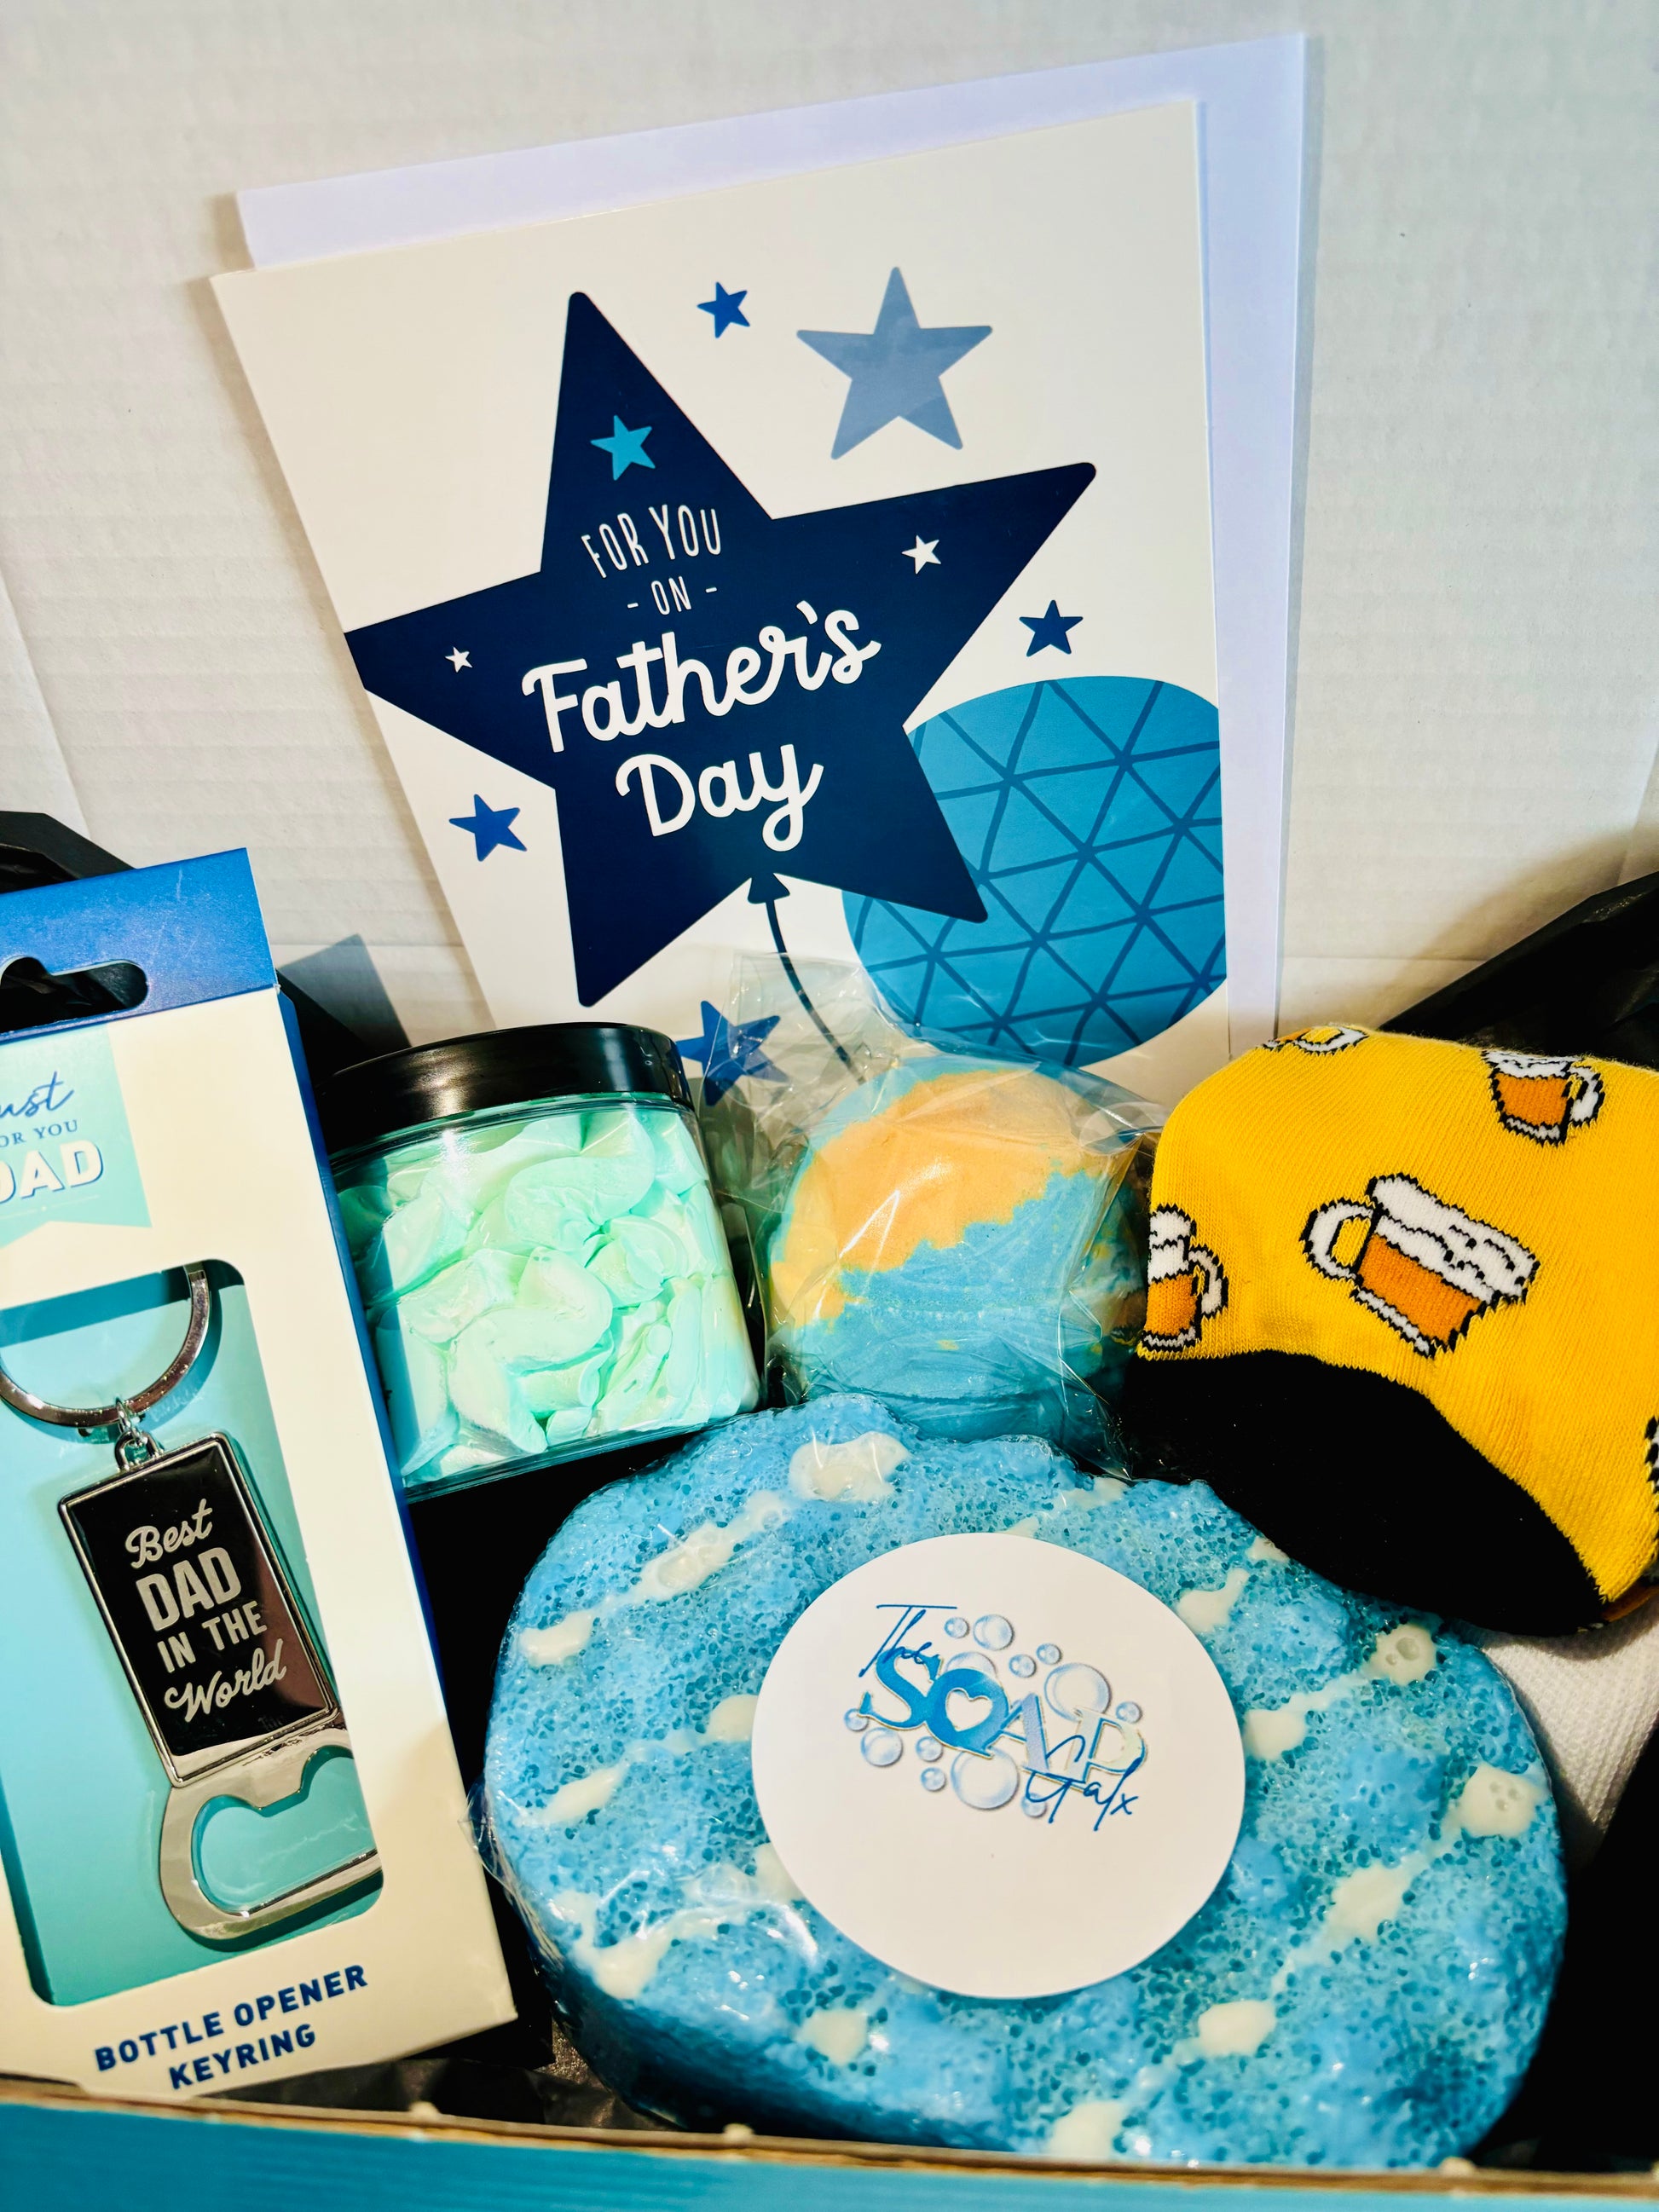 A Father's Day gift set featuring aftershave-inspired scents, a card, bottle opener keyring, bath bombs, socks with beer mug design, and mint candies in a tin is available as the **Men’s Father's Day Skincare Gift Set Door To Door** by **The Soap Gal x**.